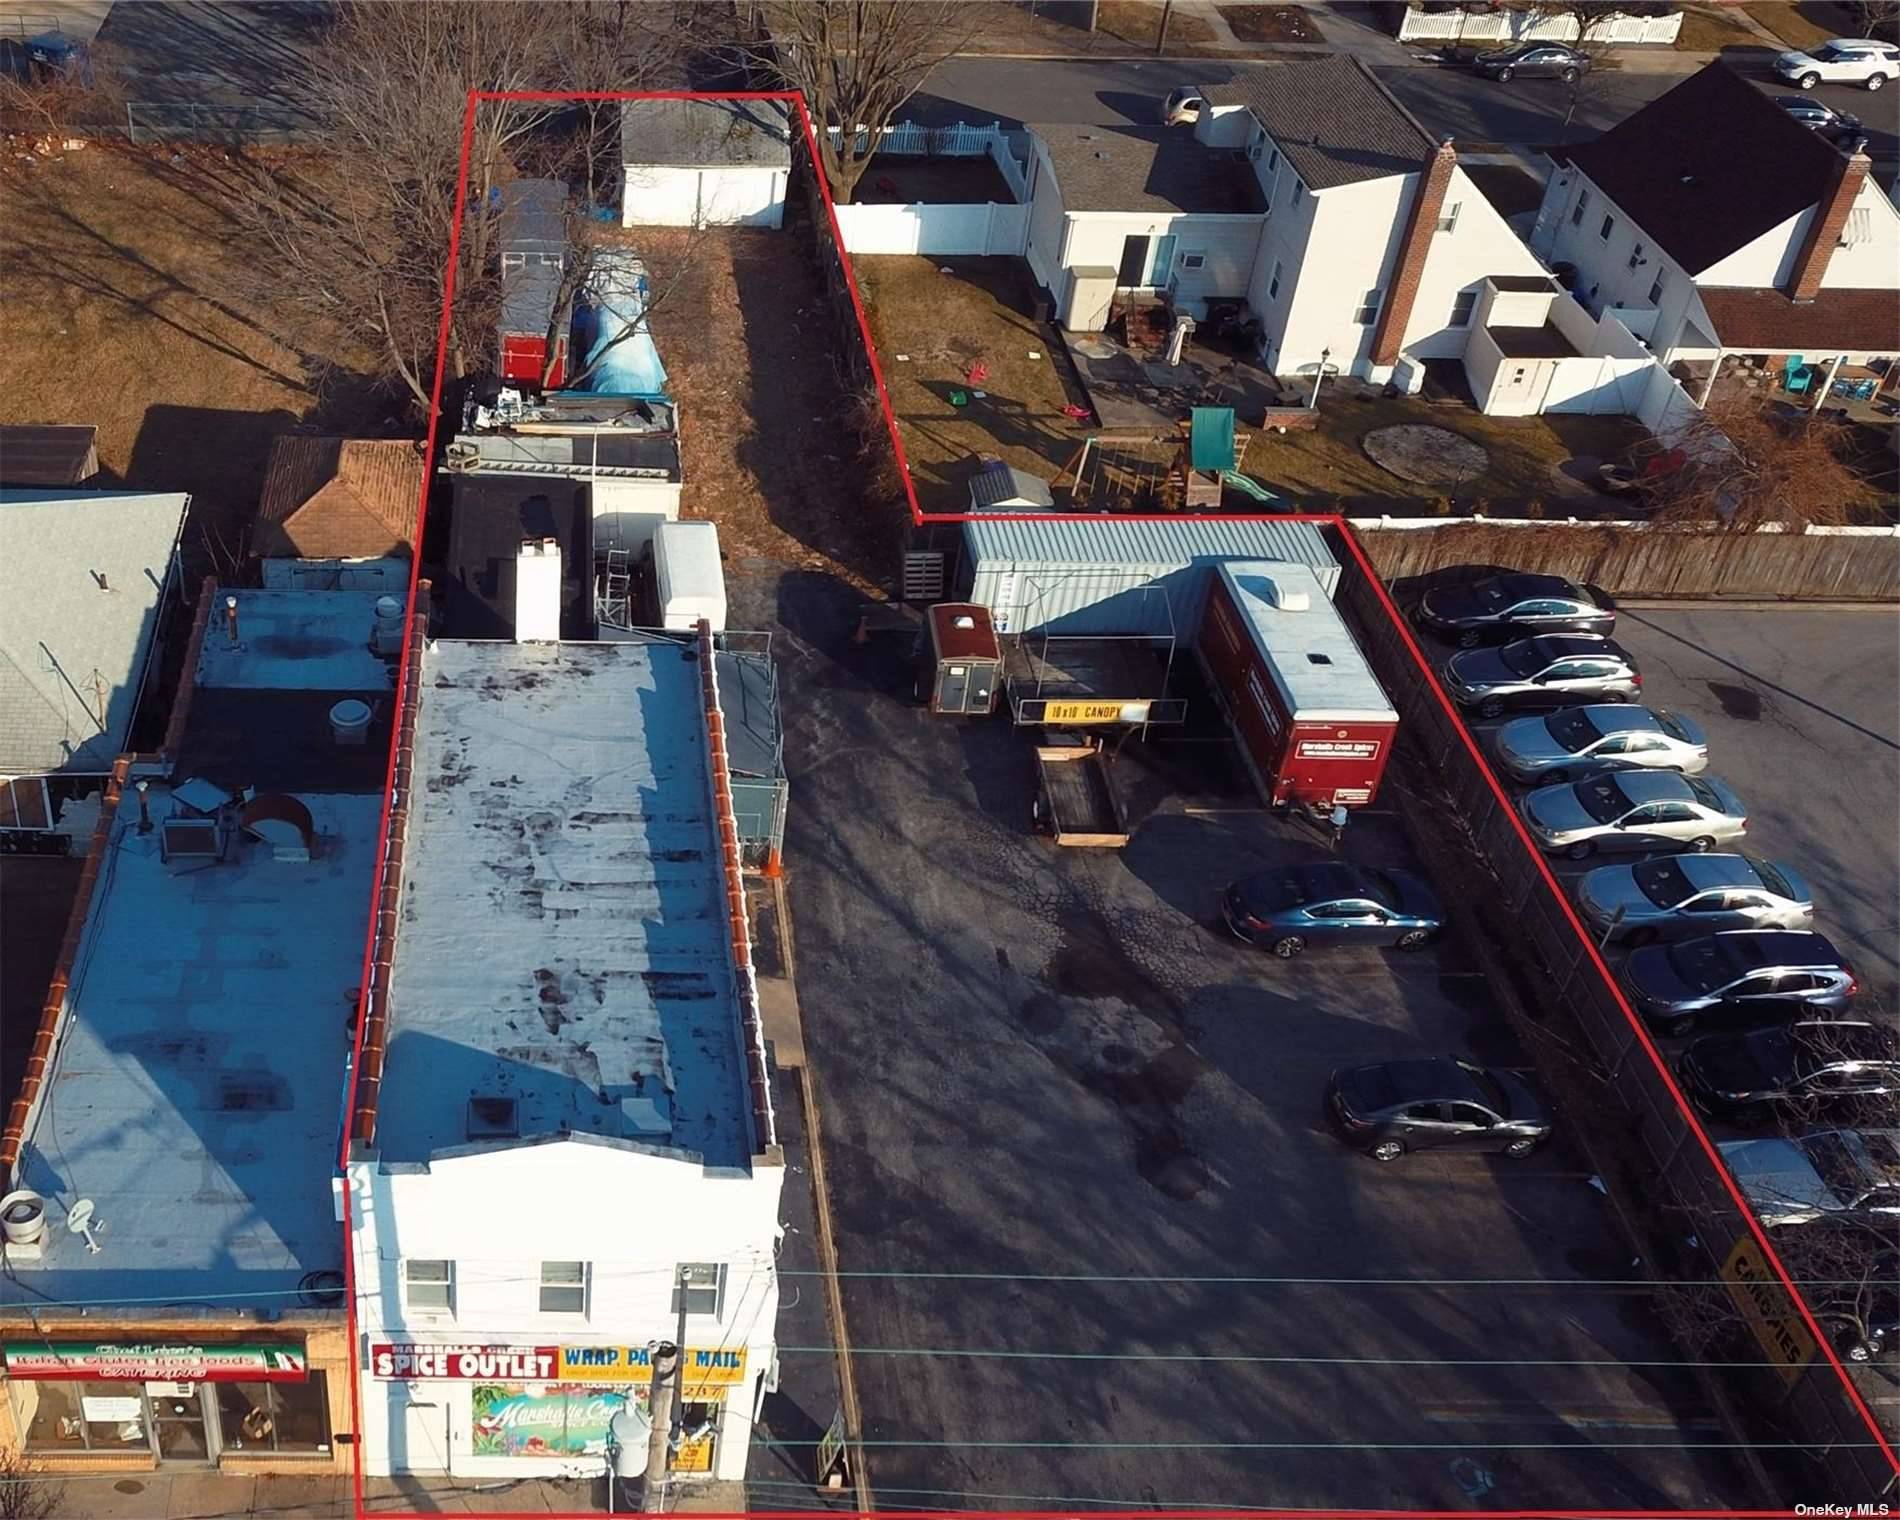 3237 Long Beach Road Oceanside NY 11572 Mixed use building with approximately 1480SF ground level retail space, and a 2 bedroom 1, 000 SF residential apartment on the second floor.